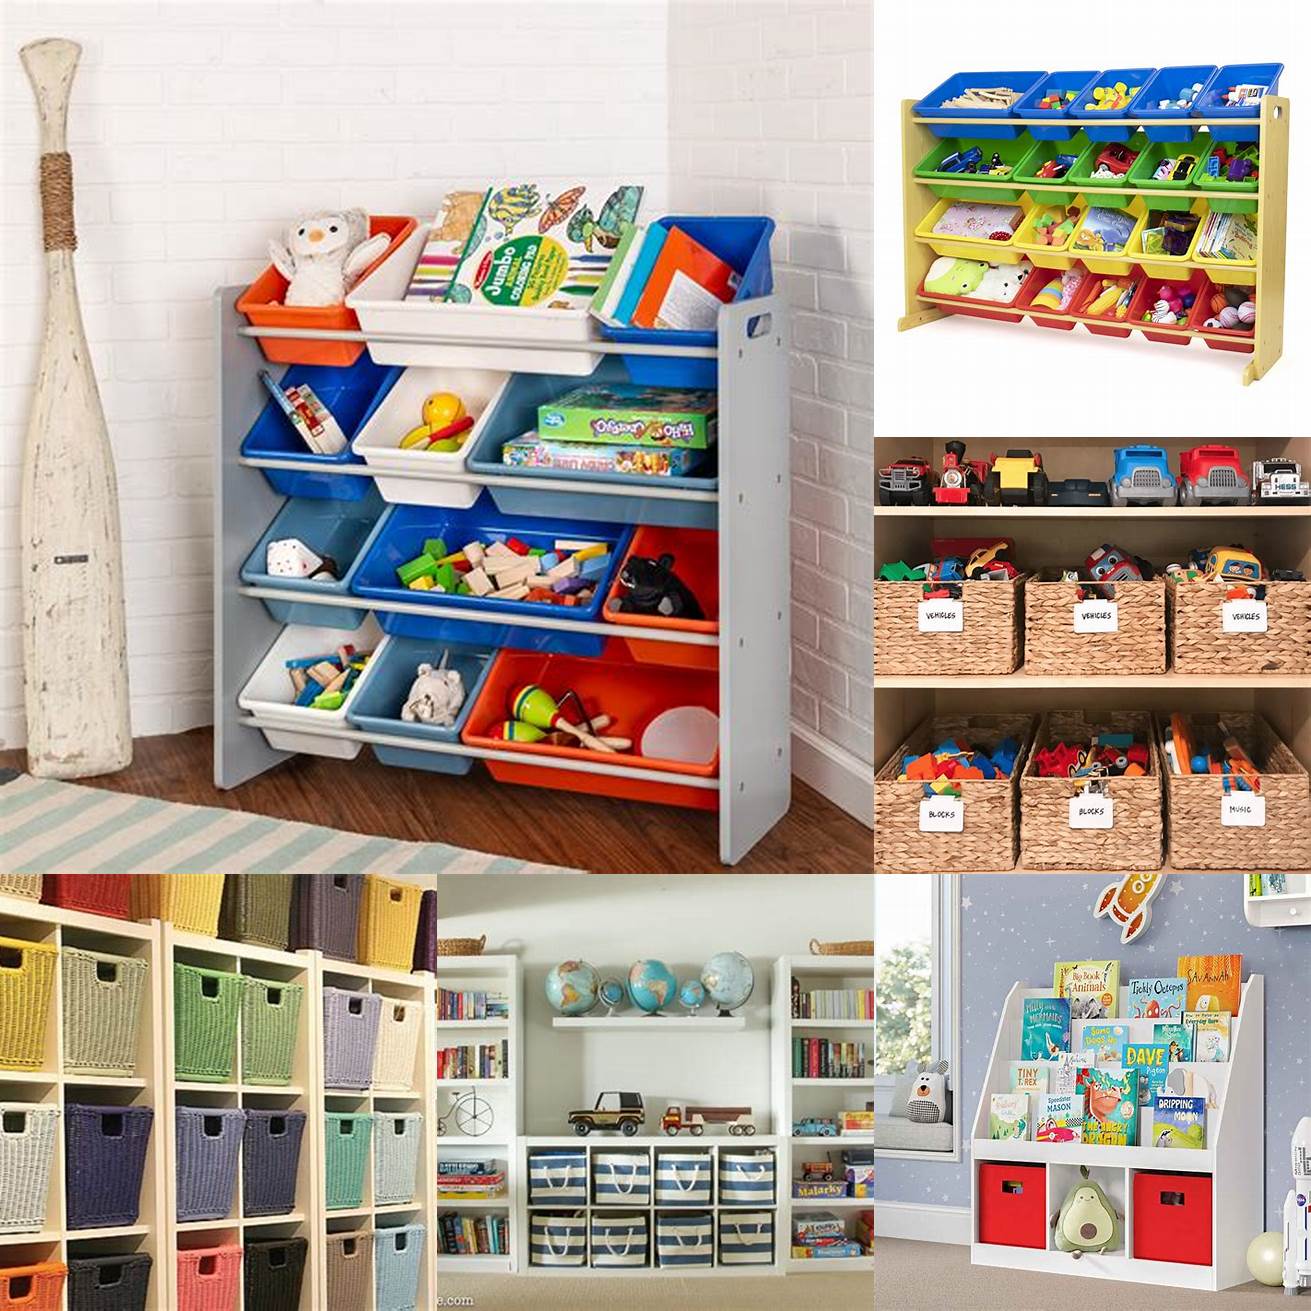 You can use colorful bins baskets and shelves to store your childs toys and books This will help keep their bedroom organized and clutter-free